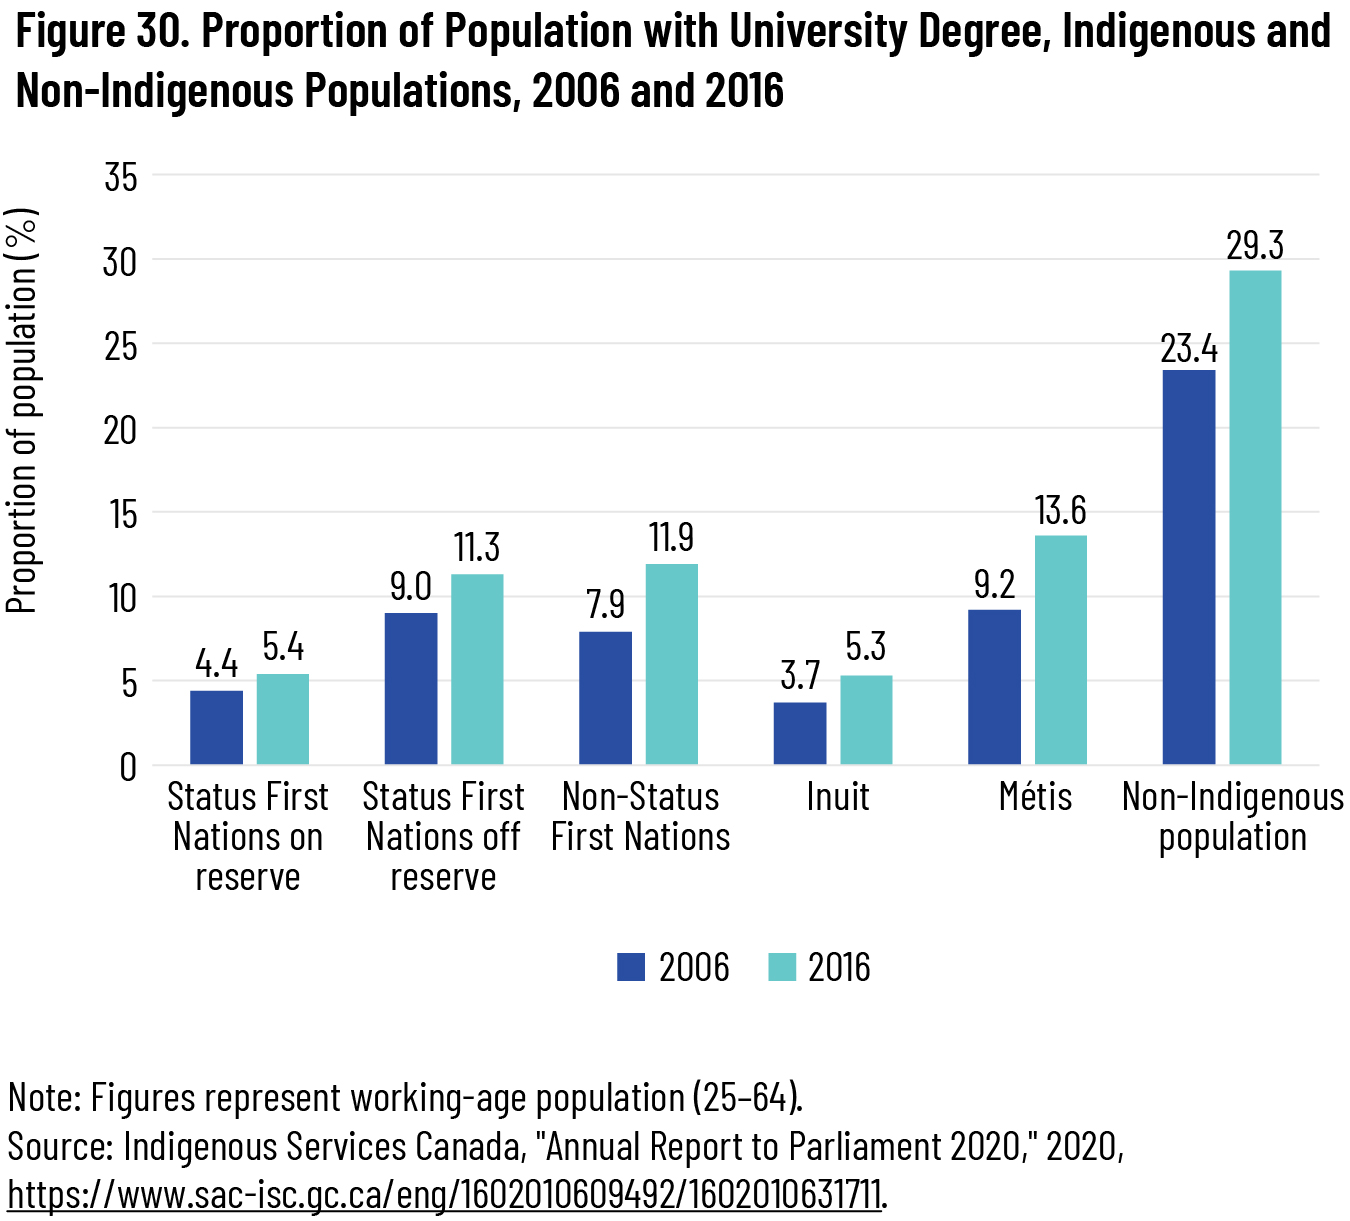 Figure 30. Proportion of Population with University Degree, Indigenous and Non-Indigenous Populations, 2006 and 2016